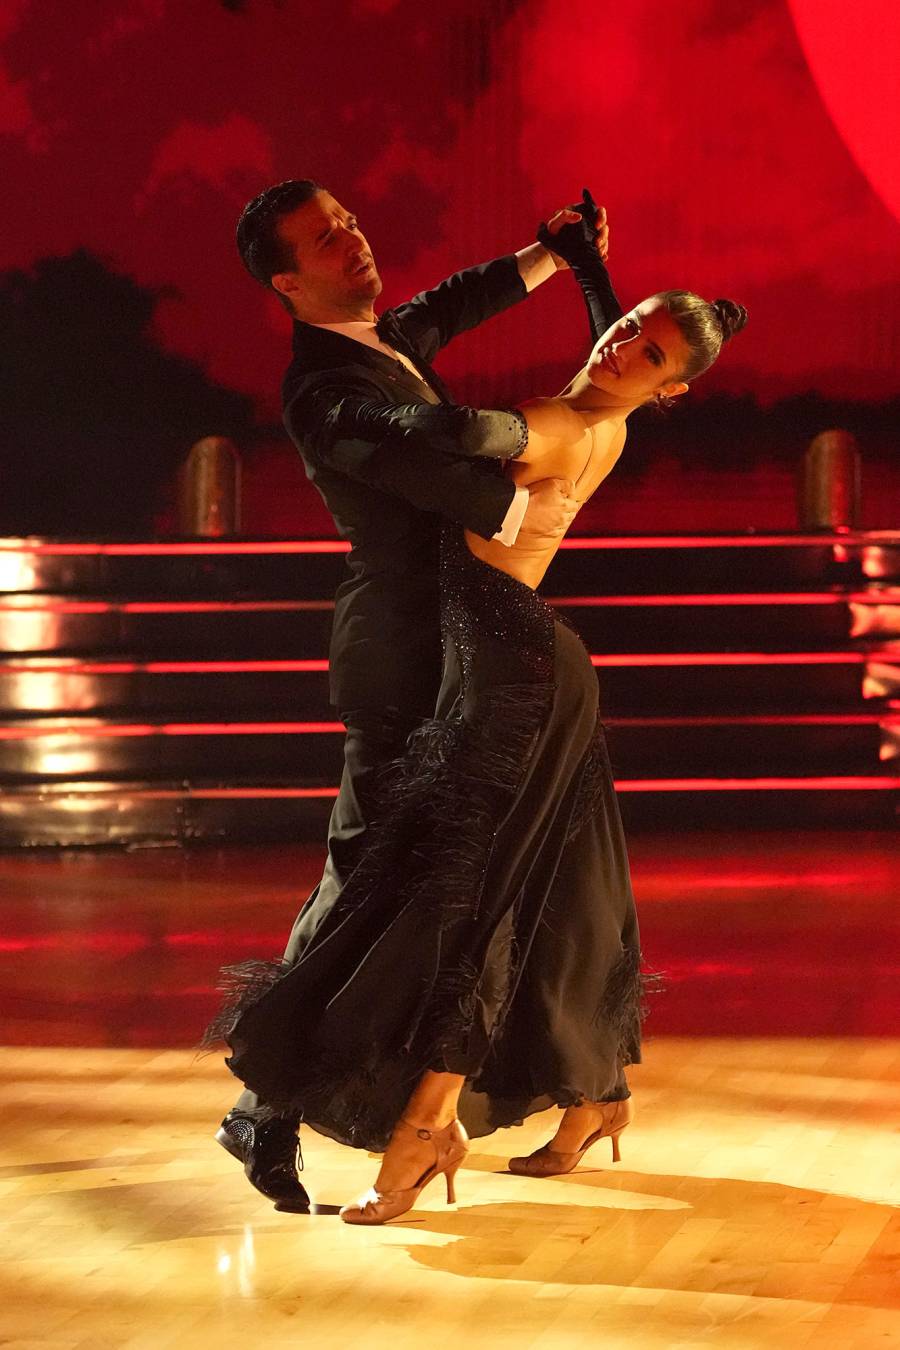 Charli D'Amelio and Mark Ballas Dancing With the Stars Michael Buble Night DWTS Recap